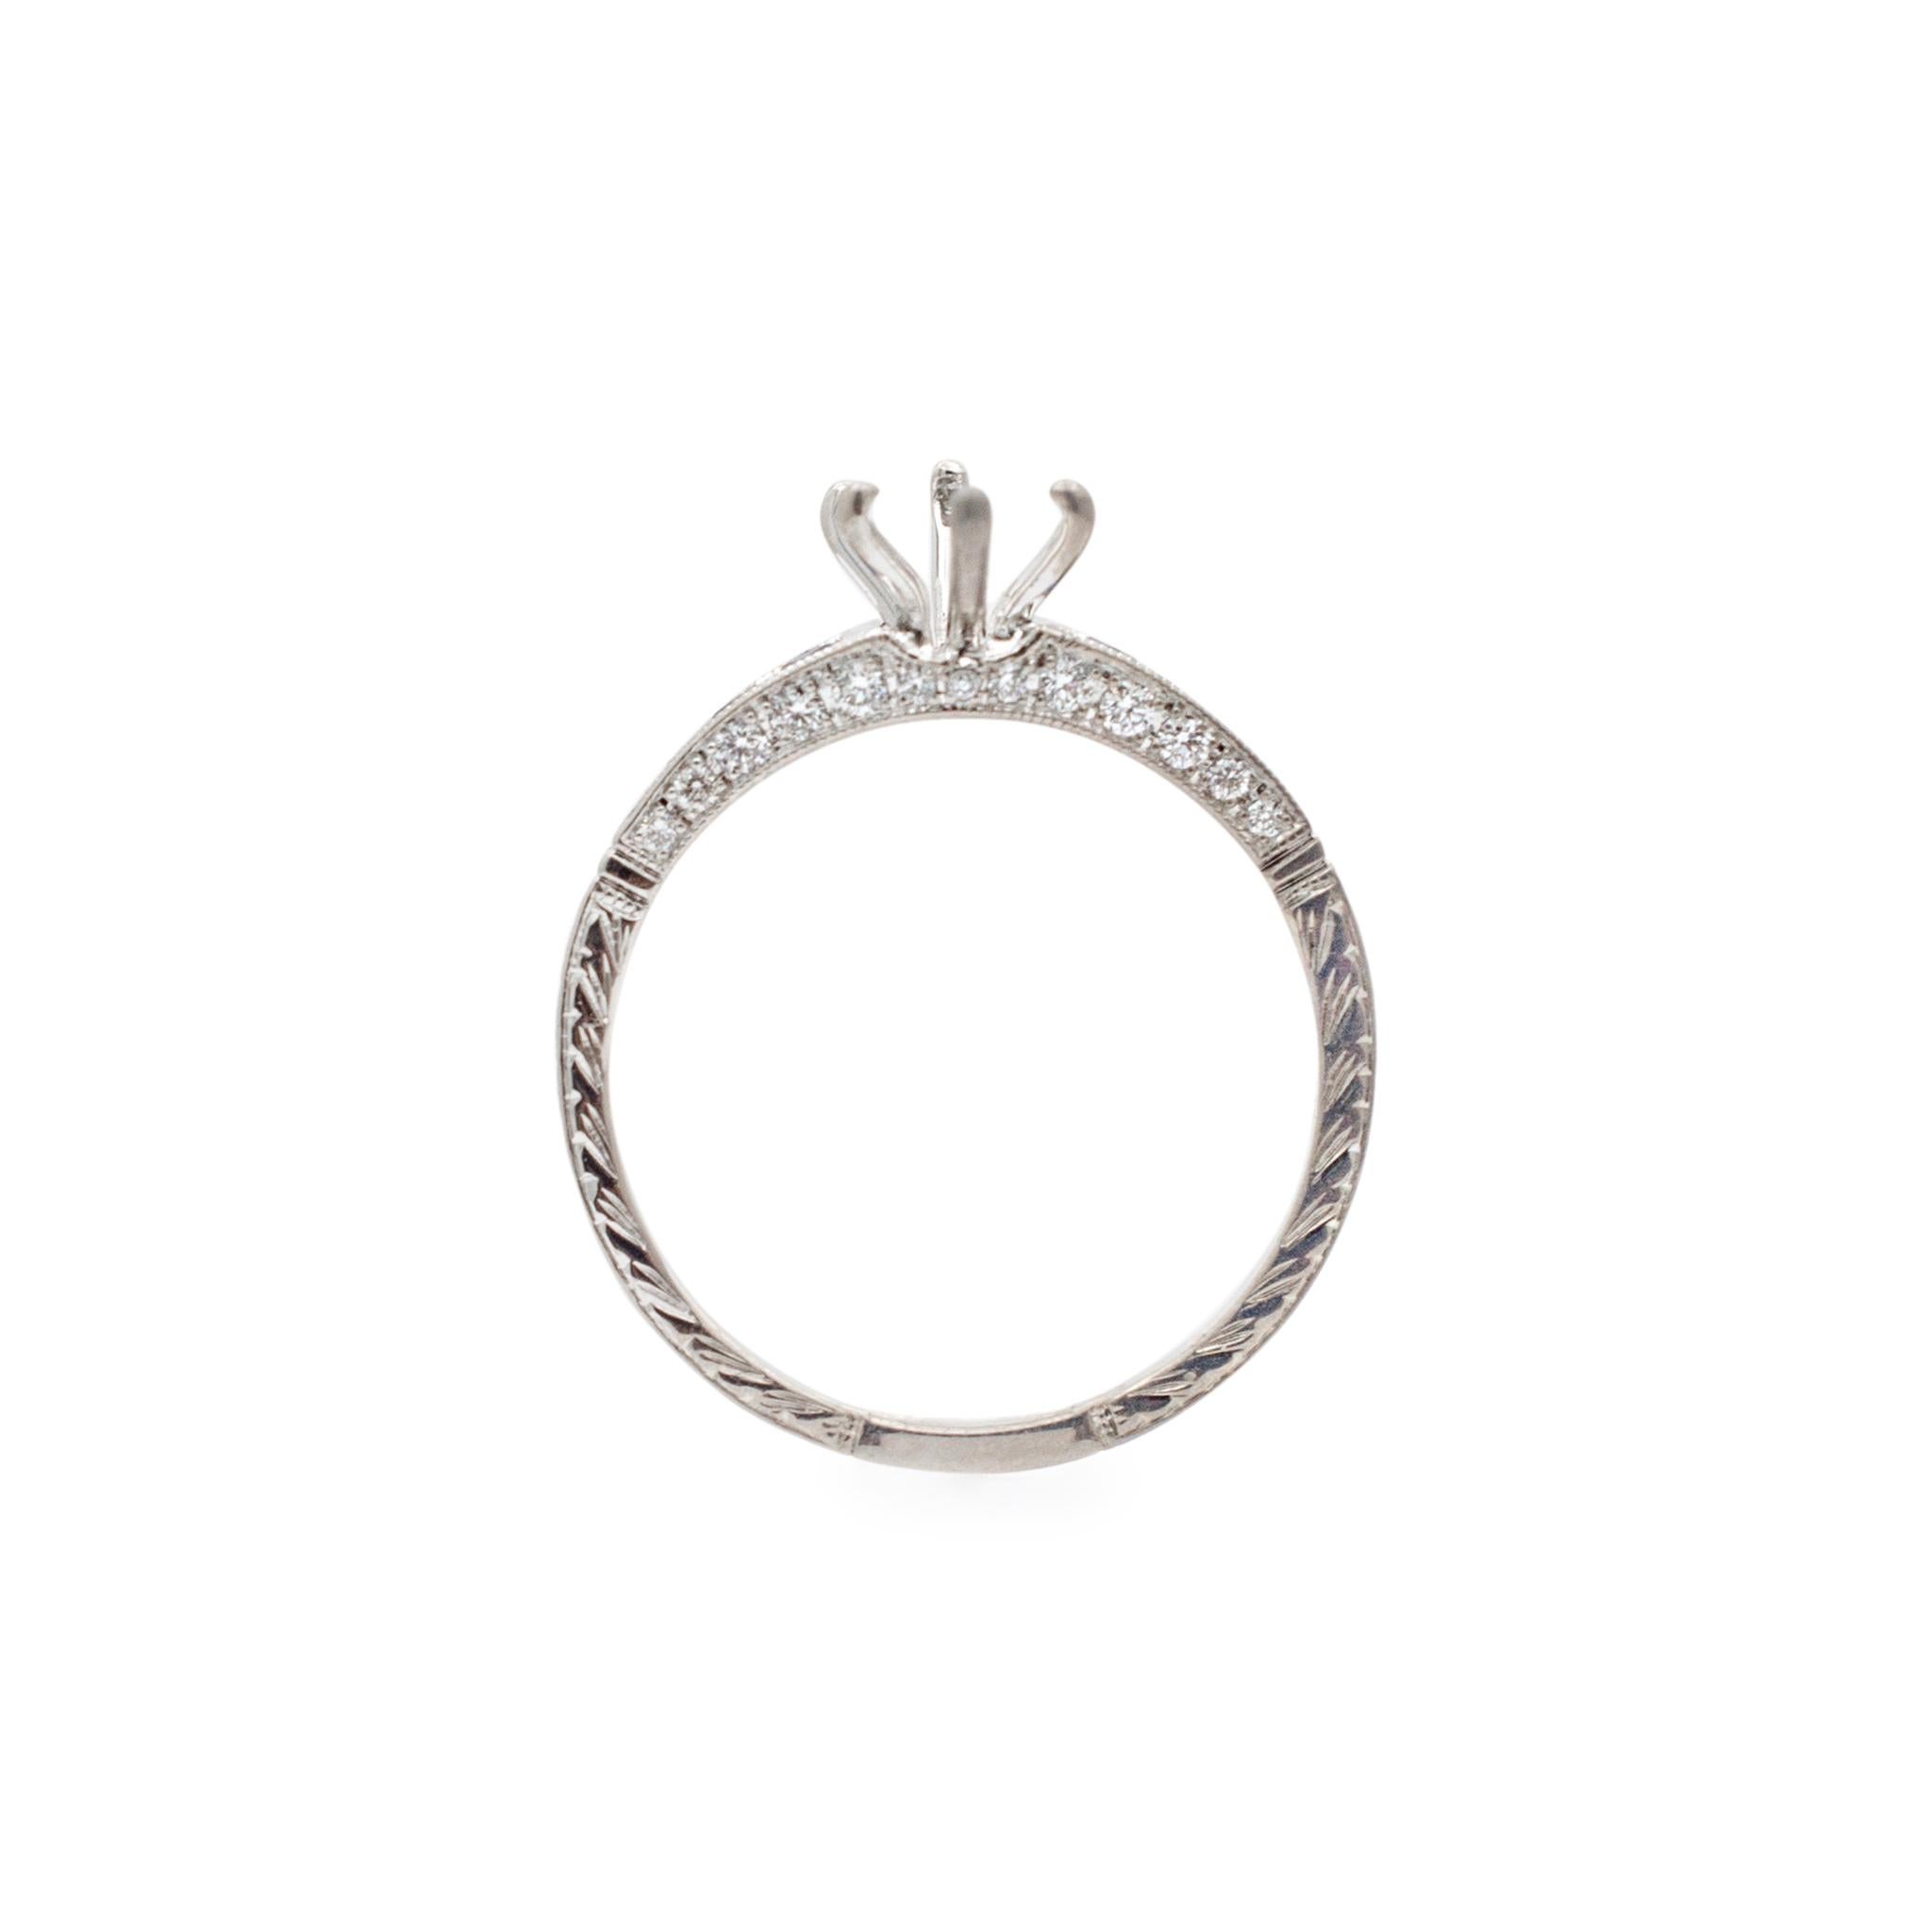 Gender: Ladies

Metal Type: 18K White Gold

Size: 6.5

Can accommodate a marquise shaped stone measures between 9.90mm to 10.10mm in length by 4.90mm to 5.10mm in width.

Shank maximum width: 1.60mm.

Weight: 1.93 grams

Ladies 18K white gold,